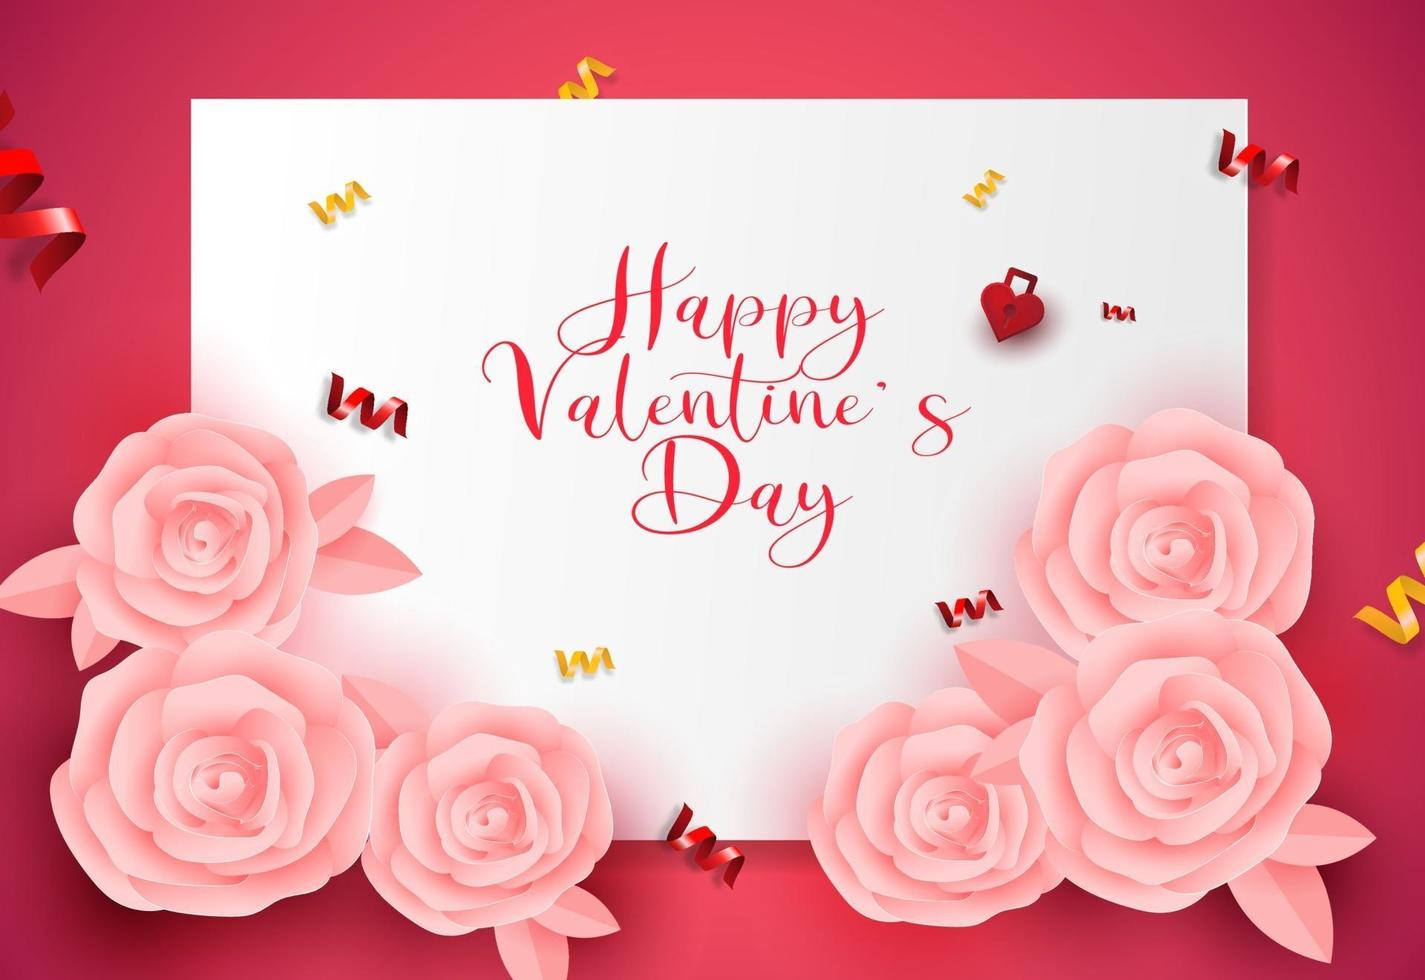 Valentine's Day greeting card design sale banner,poster background with Pink roses origami shape. vector